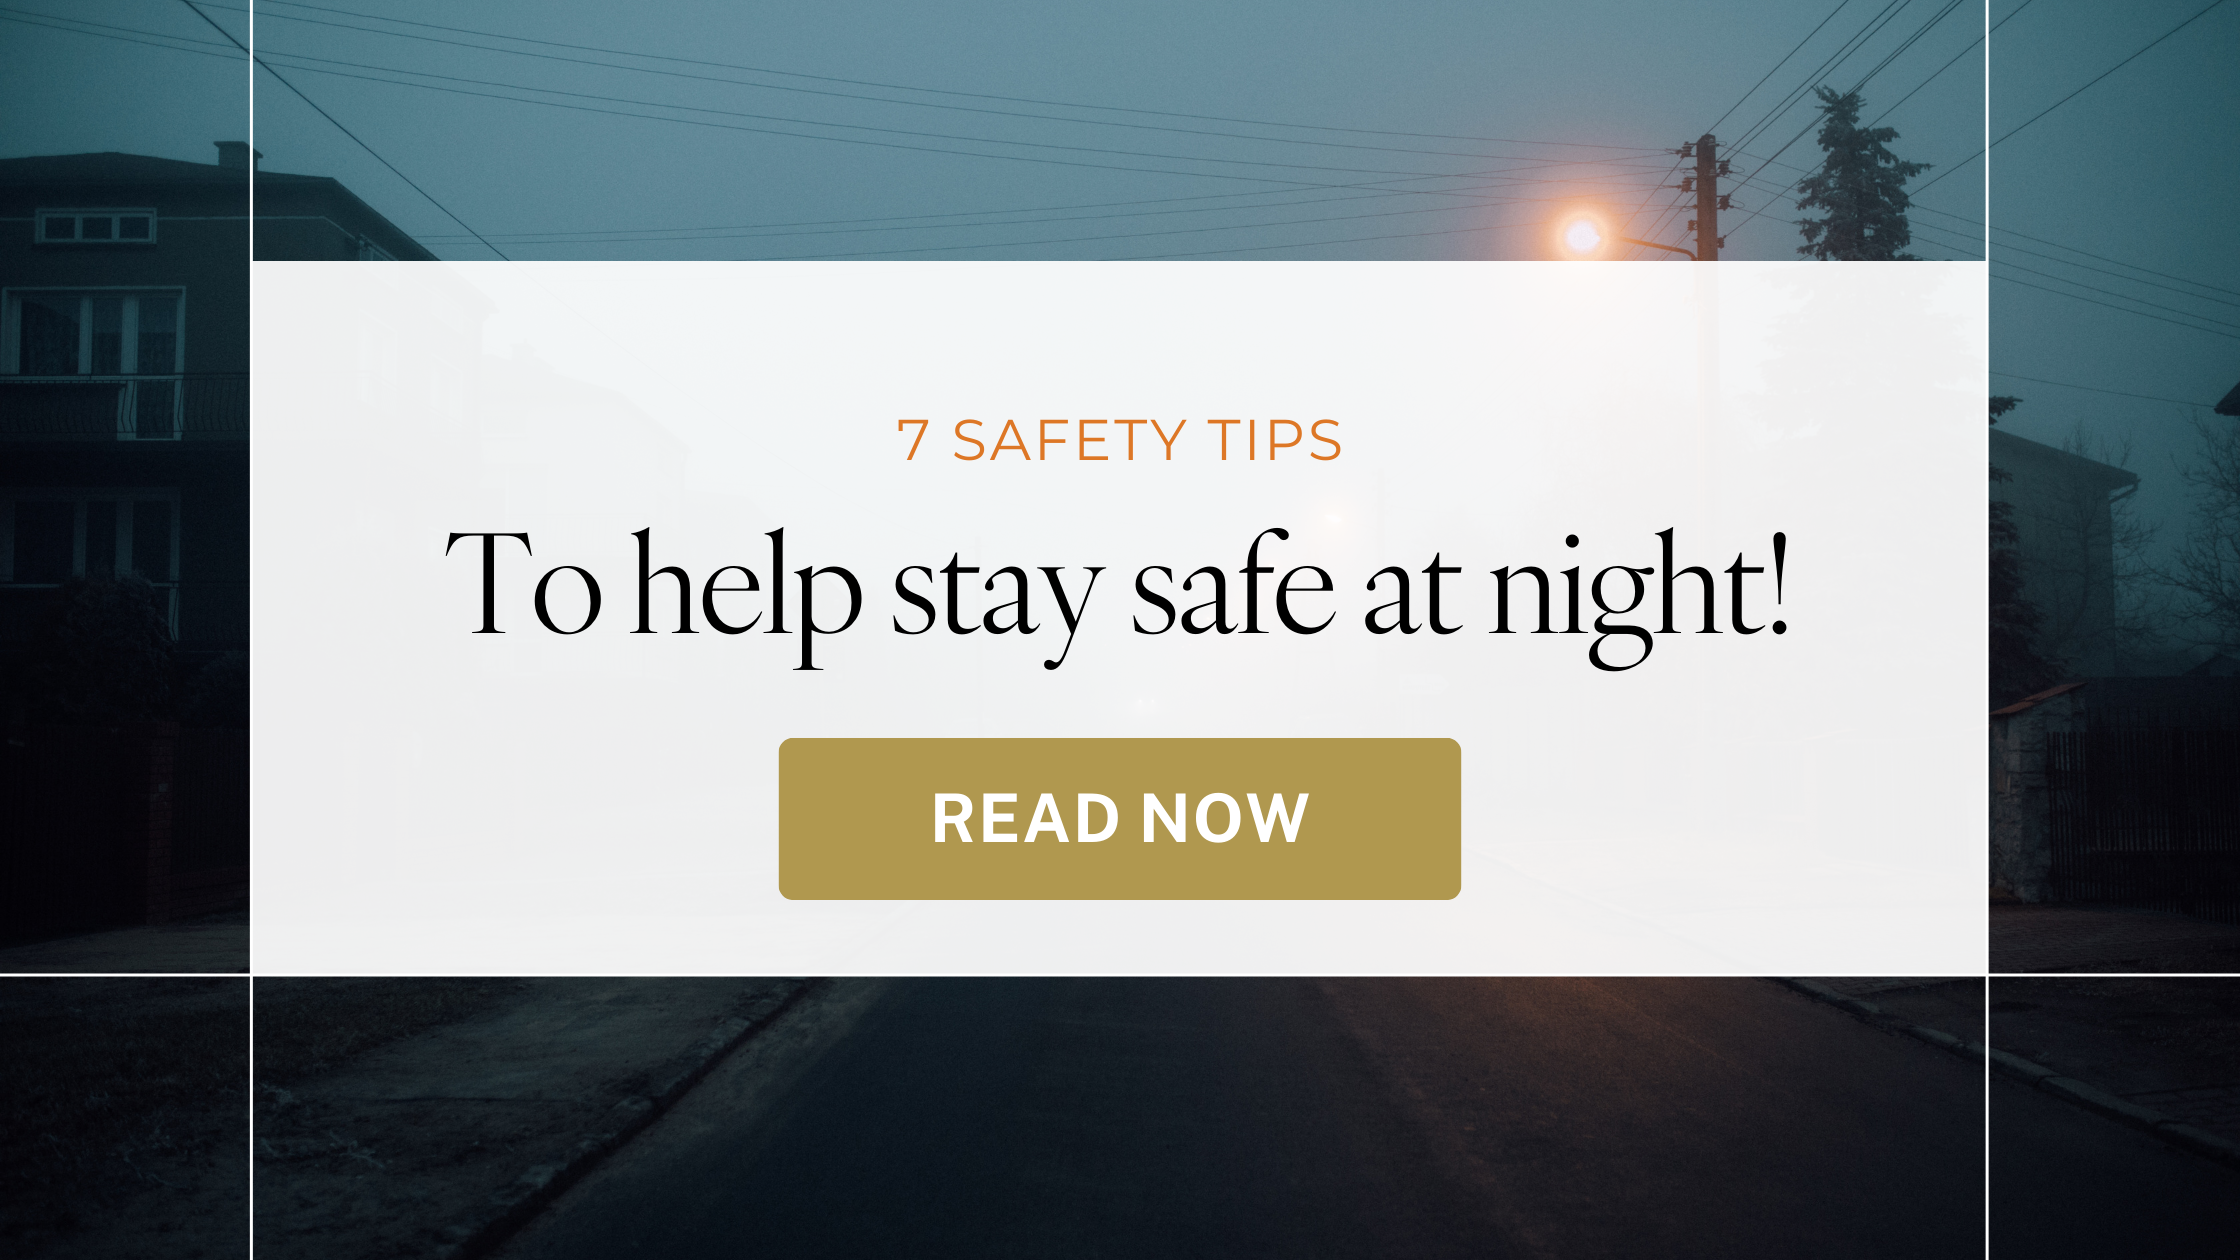 7 Safety Tips That'll Help You Stay Safe at Night